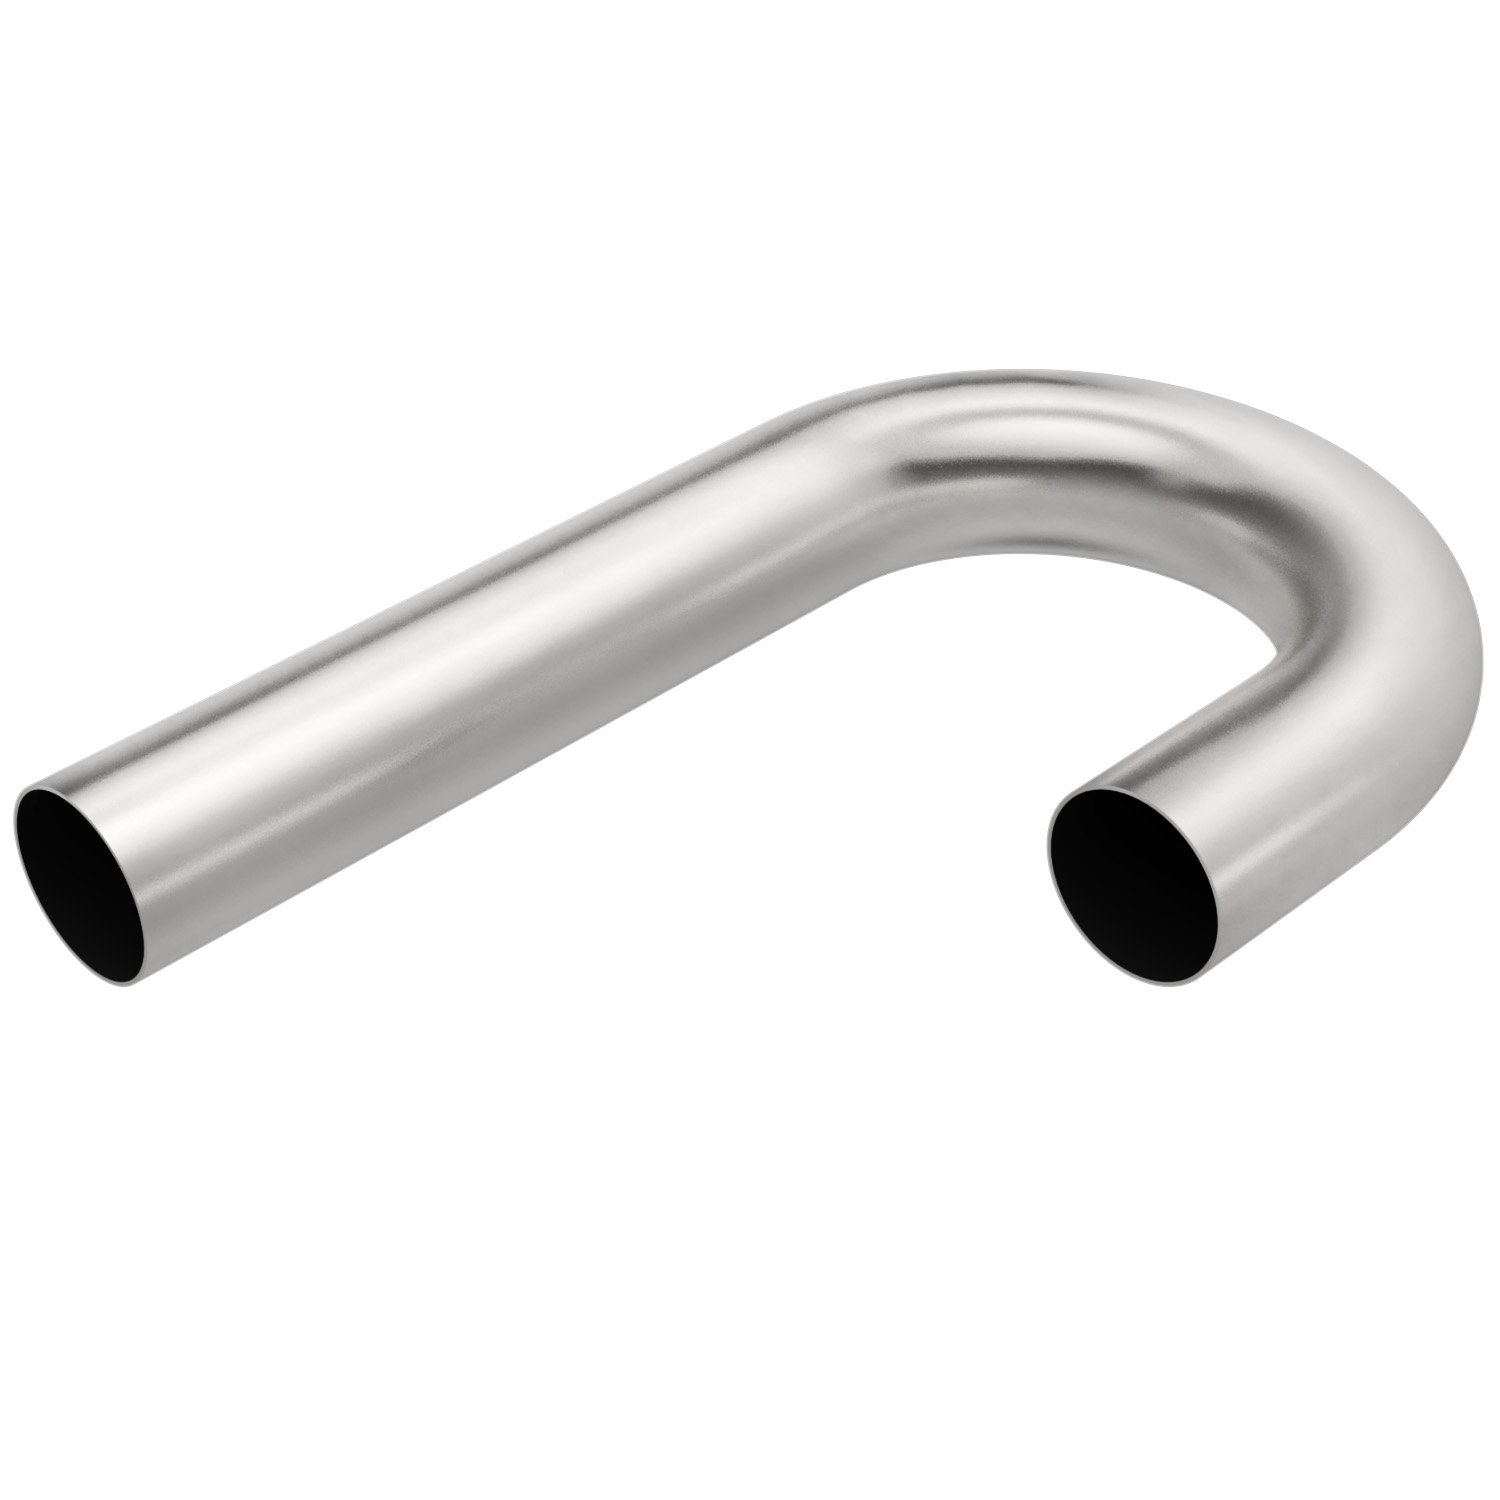 Stainless Steel 180° Transition Exhaust Pipes Outside Diameter: 2.5"